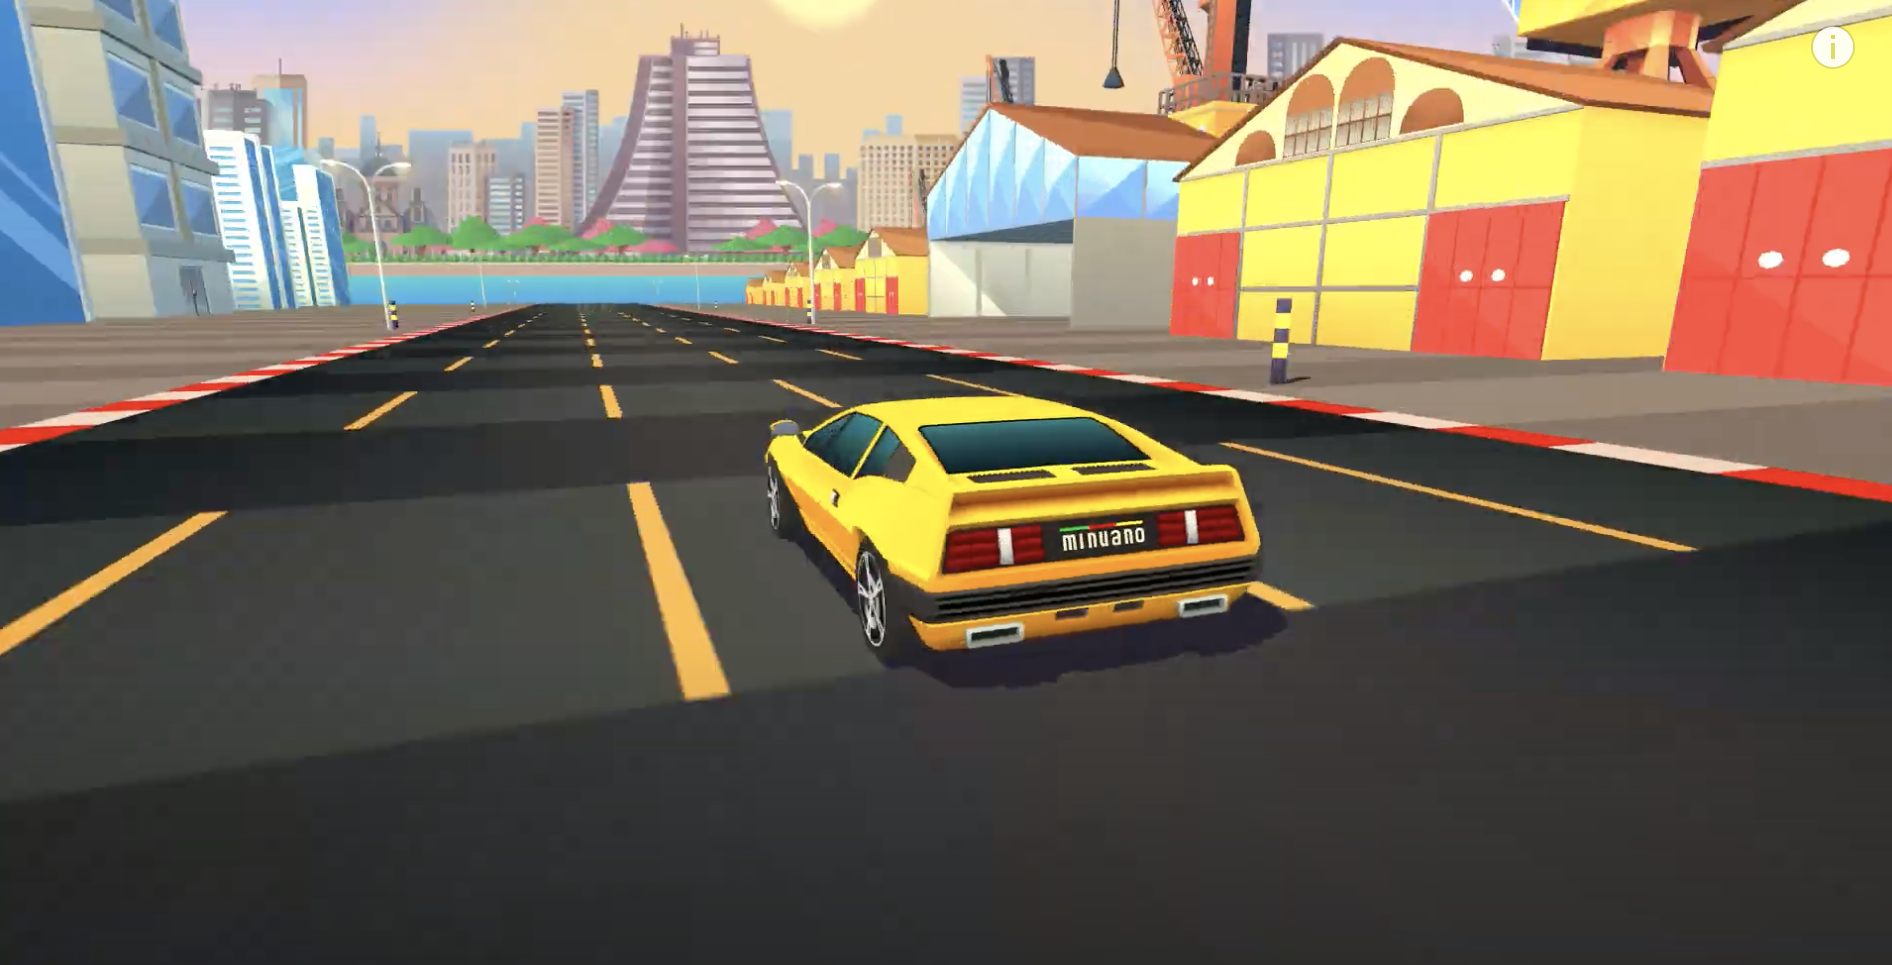 Best iPhone Game Updates: ‘Horizon Chase: World Tour’, ‘Sonic Racing’, ‘Subway Surfers’, ‘Toon Blast’, and More